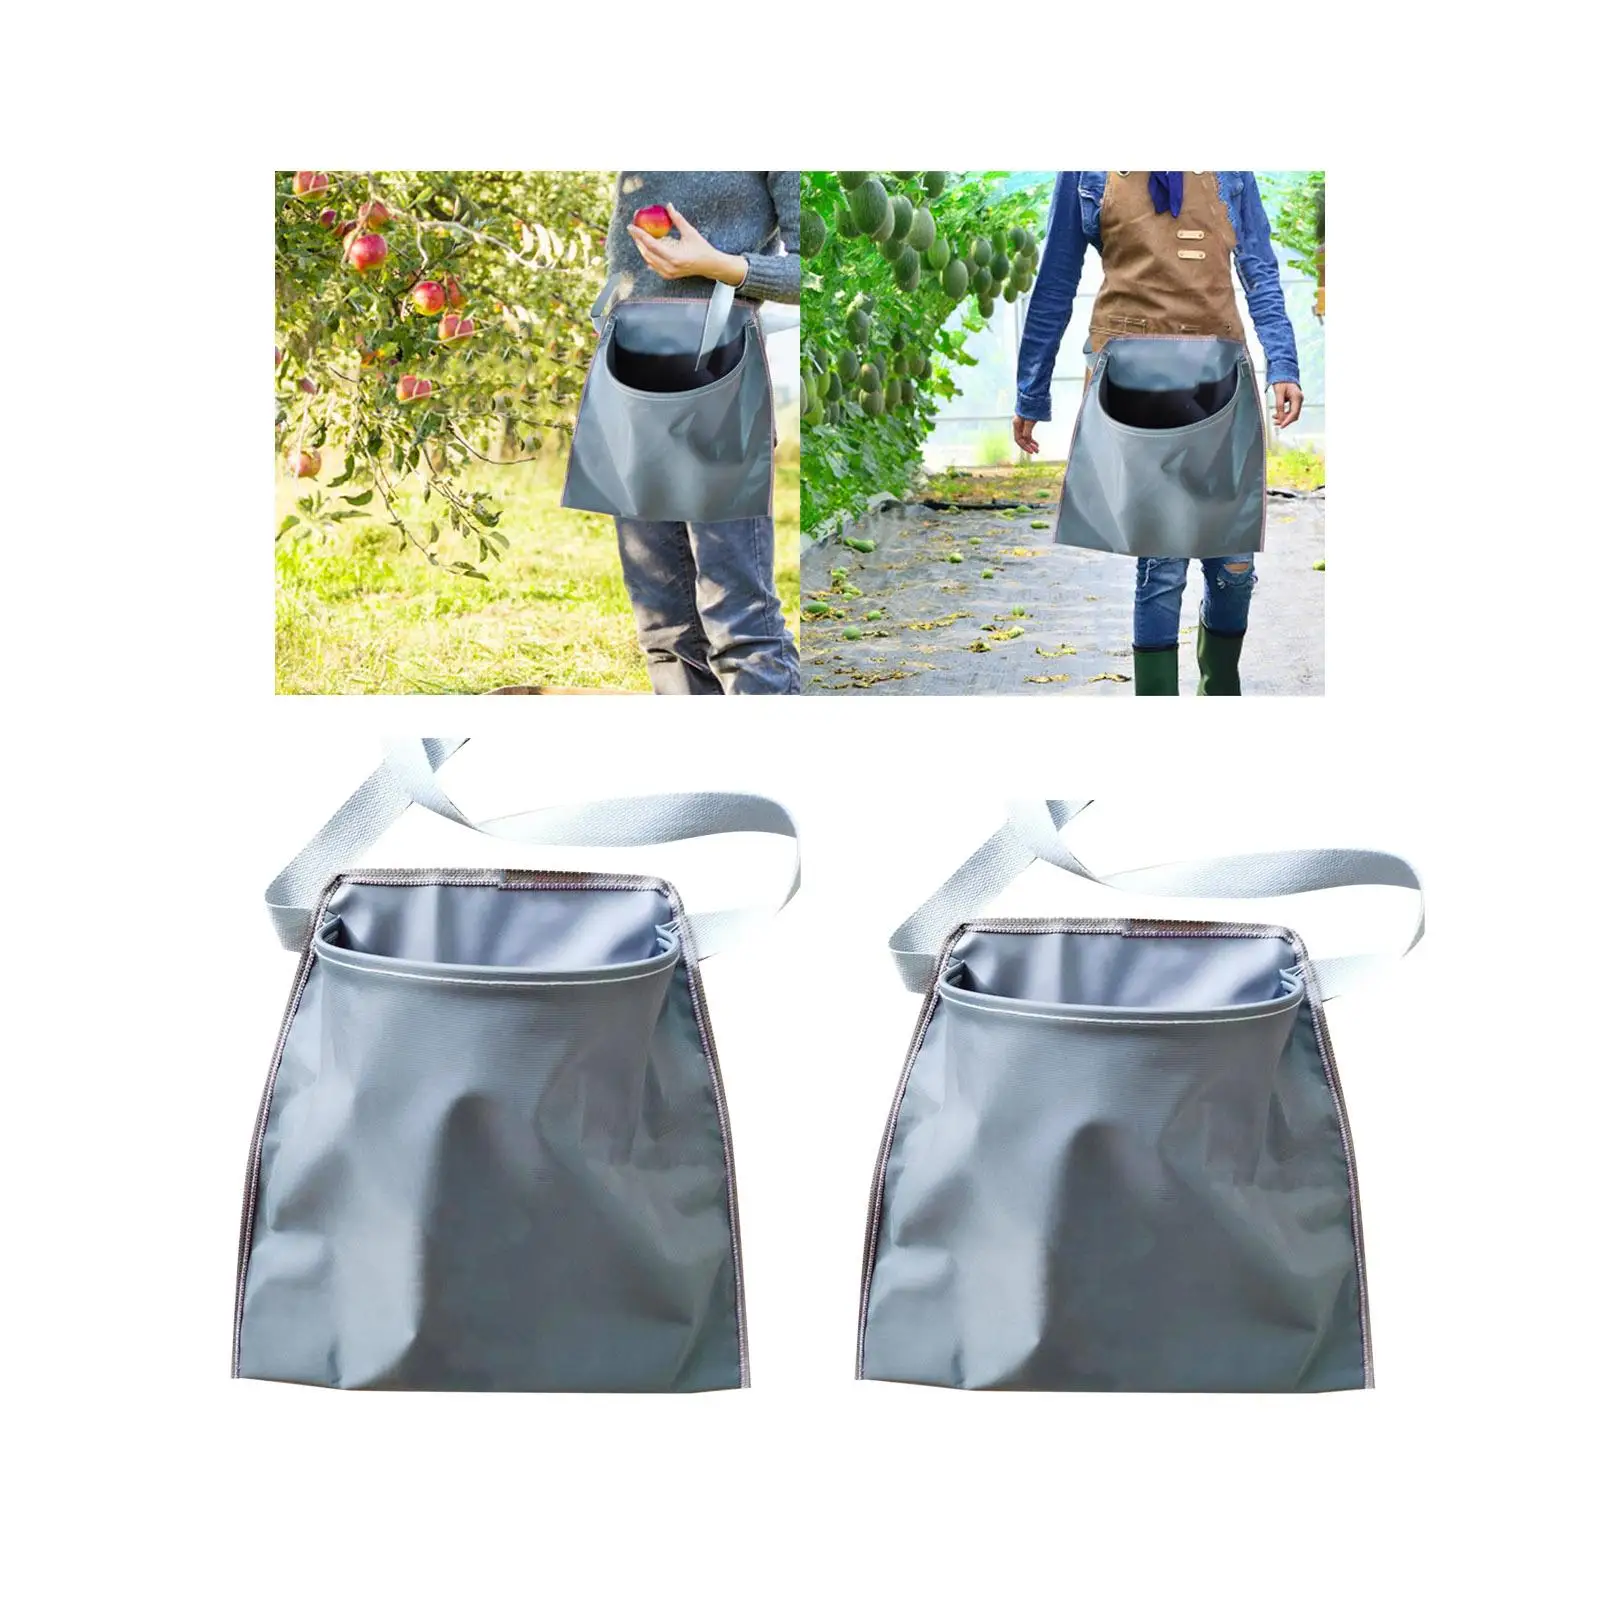 Picking Bag Garden Tool Organizer Waist Belt Fruit Storage Apron Pouch Heavy Duty for Farm Vegetable Hunting Orchard Outdoor